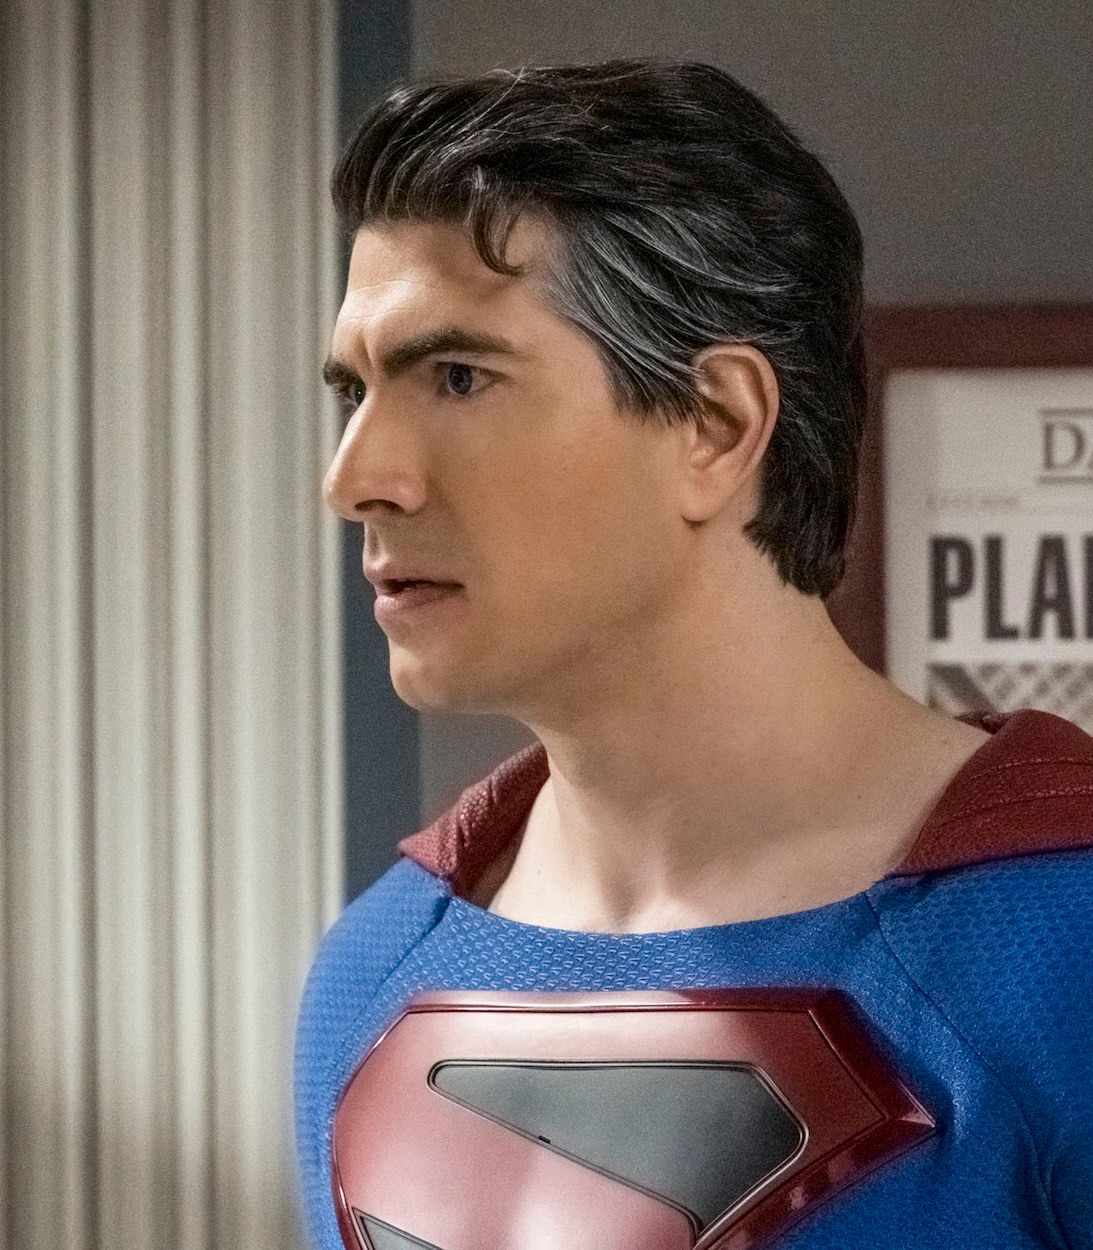 Brandon Routh as Kingdom Come Superman in Crisis on Infinite Earths